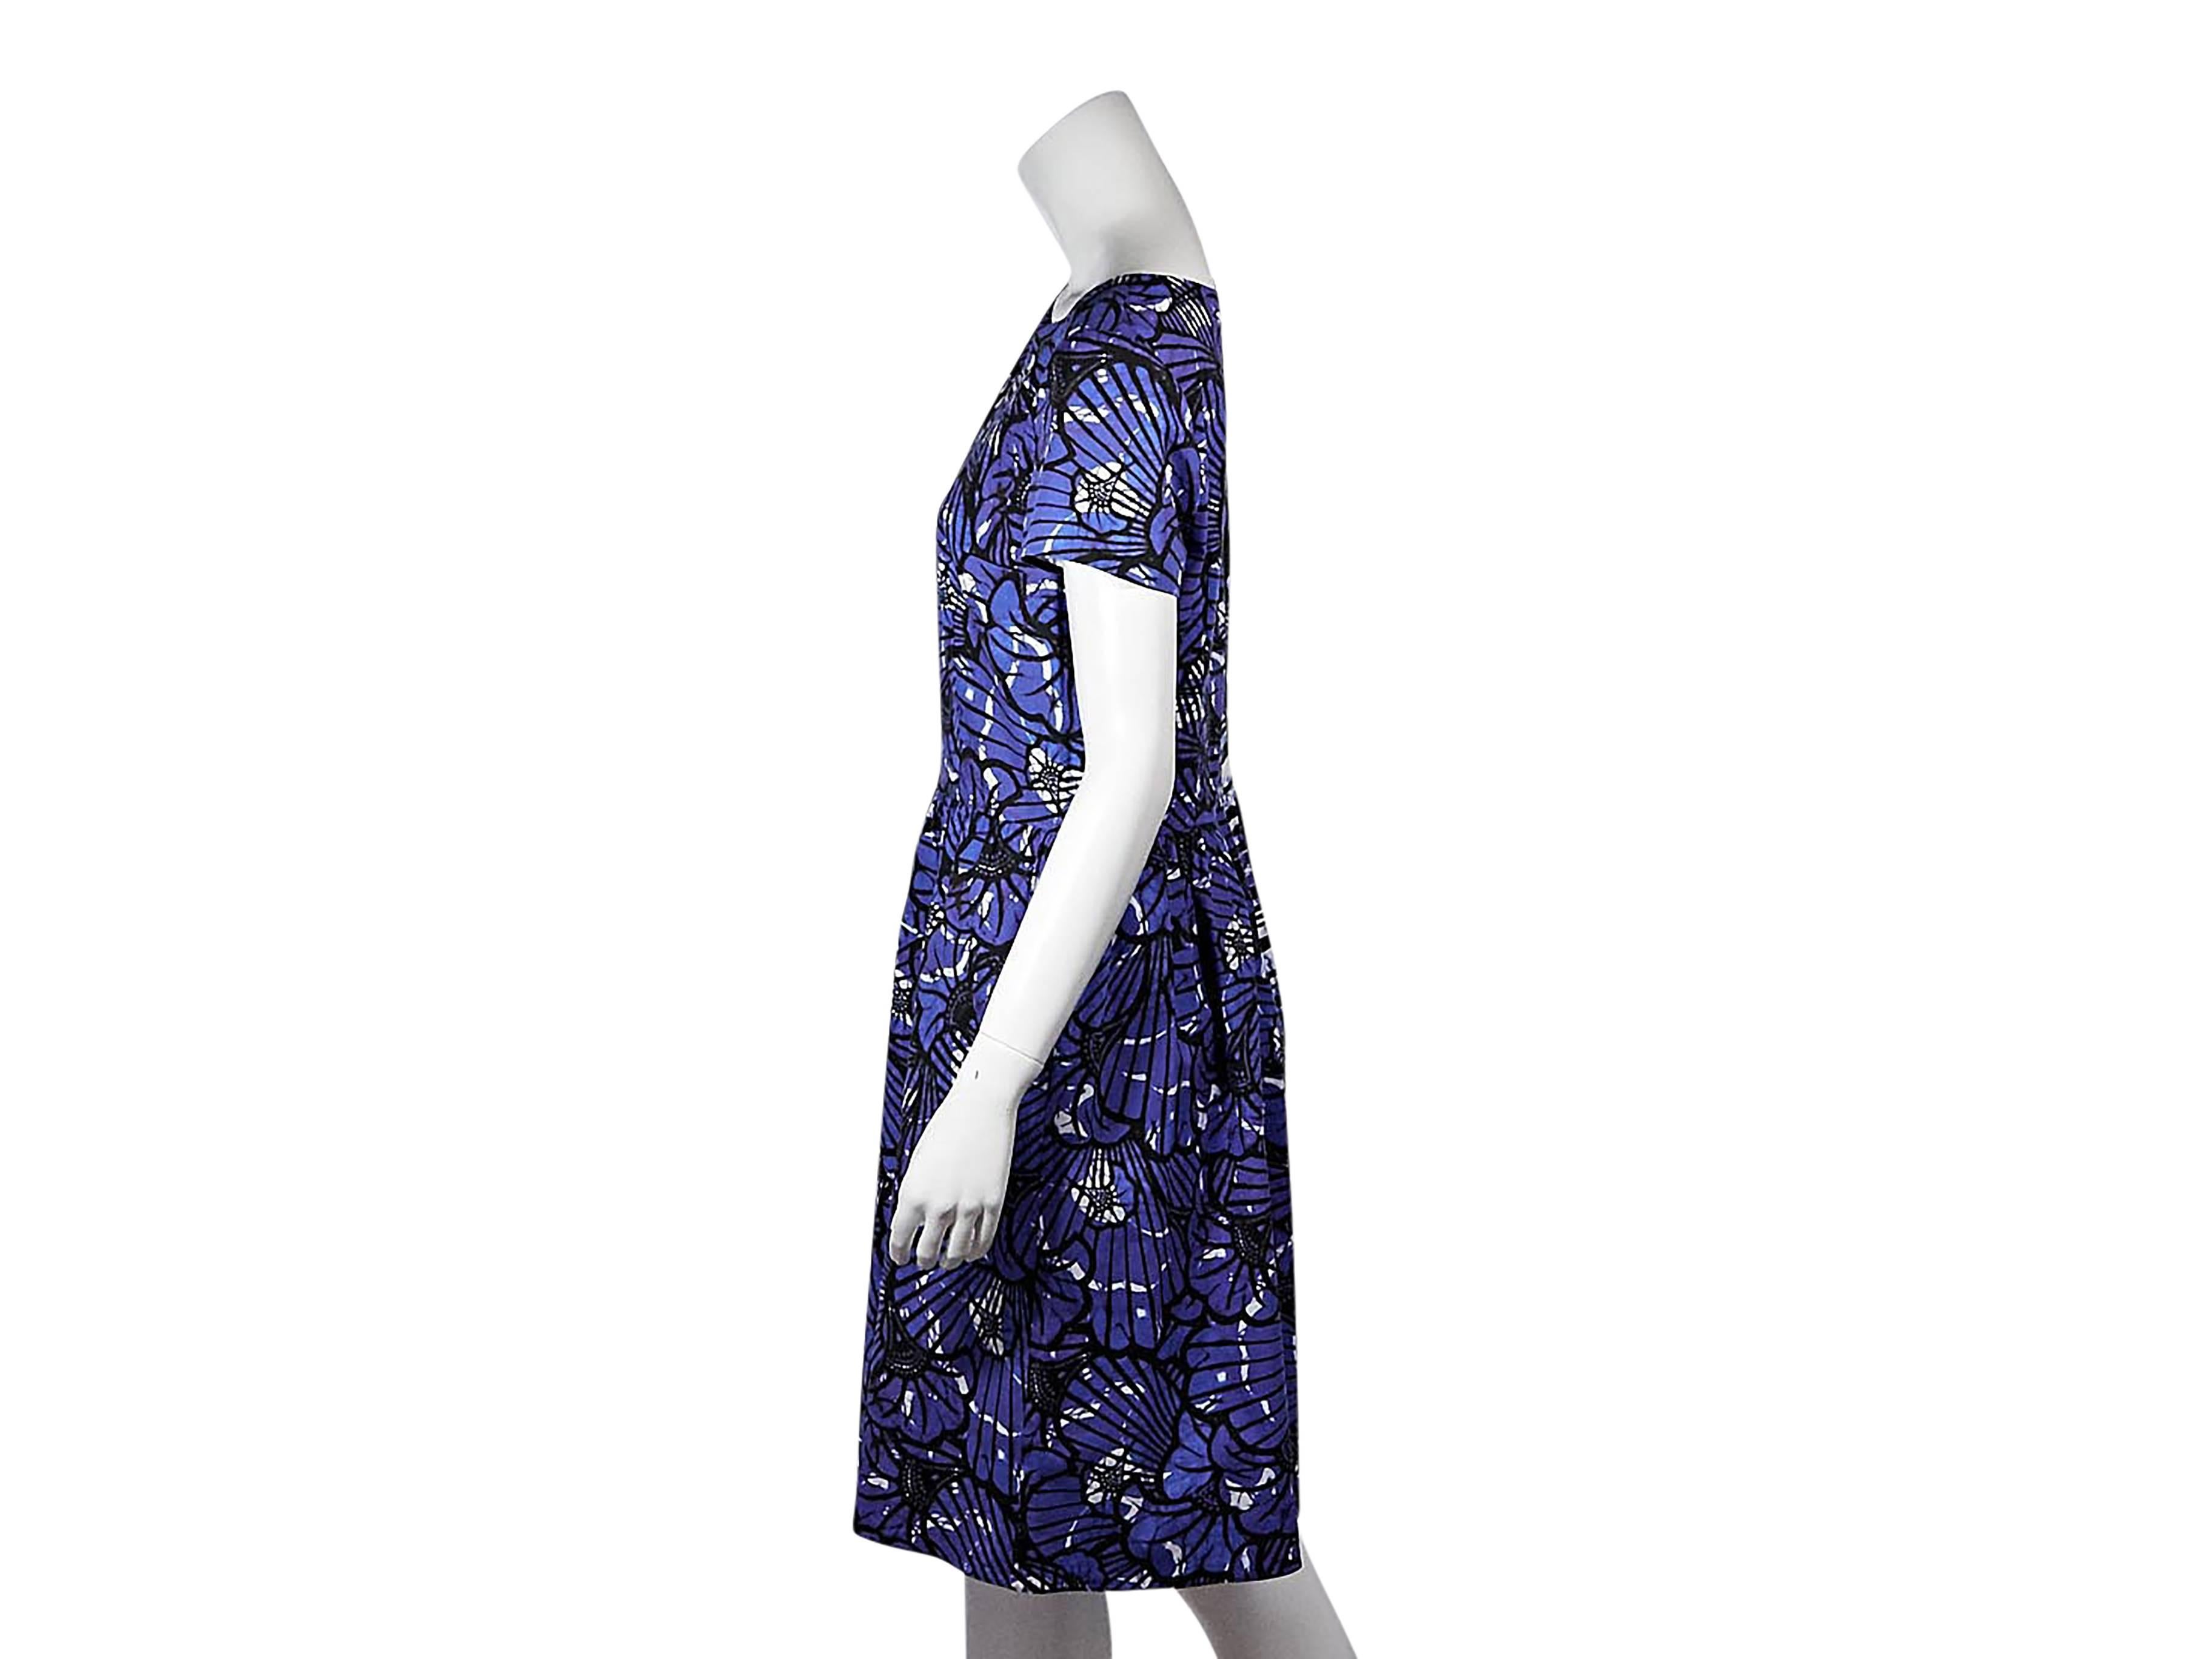 Product details: Blue abstract floral-printed fit-and-fare dress by Oscar de la Renta. Boatneck. Short sleeves. Concealed back zip closure. 
Condition: Pre-owned. Very good.

Est. Retail $ 998.00